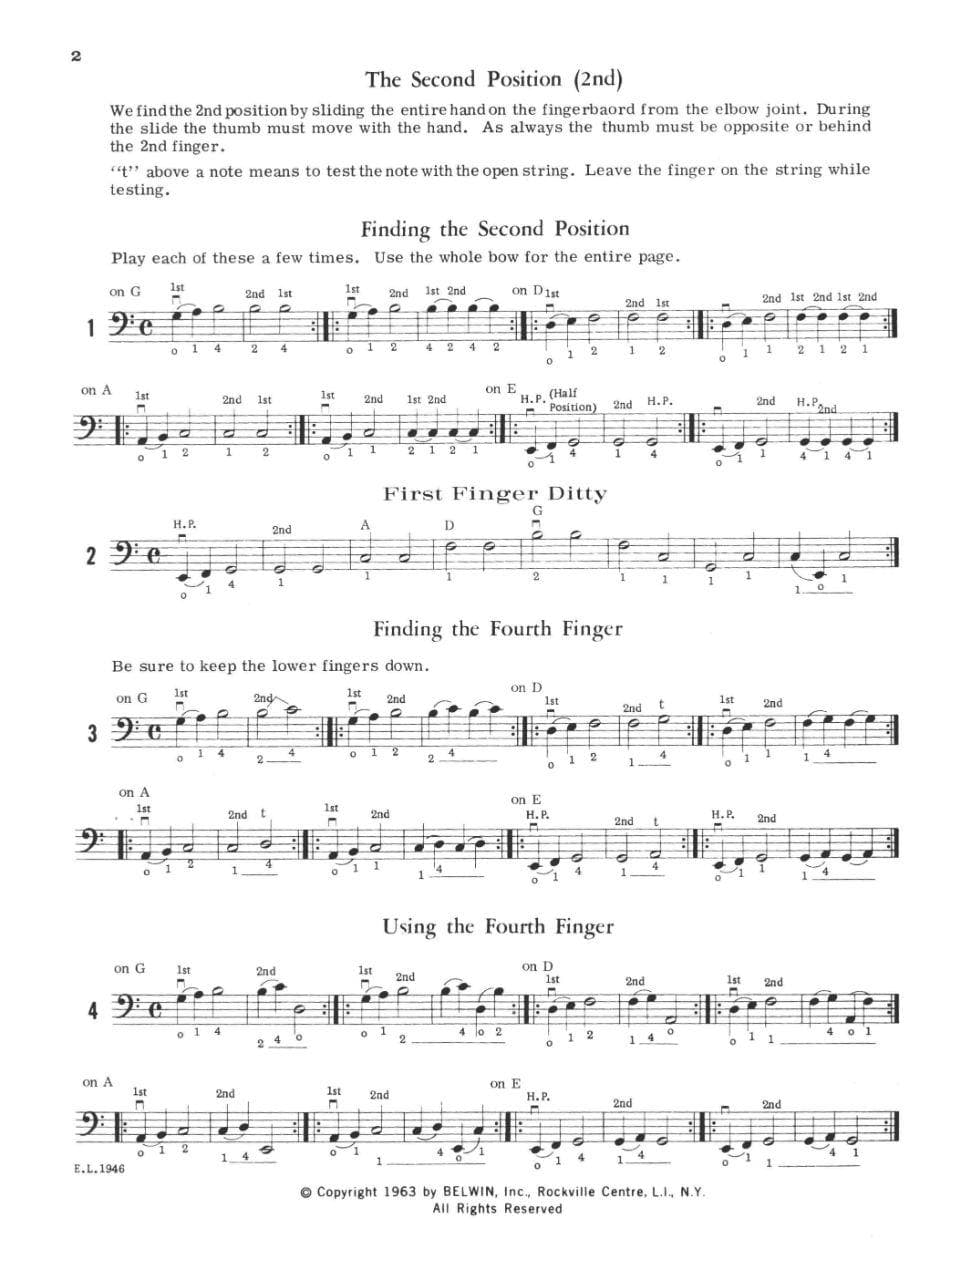 Applebaum, Samuel -2nd and 4th Position String Builder for Double Bass - Belwin/Mills Publication